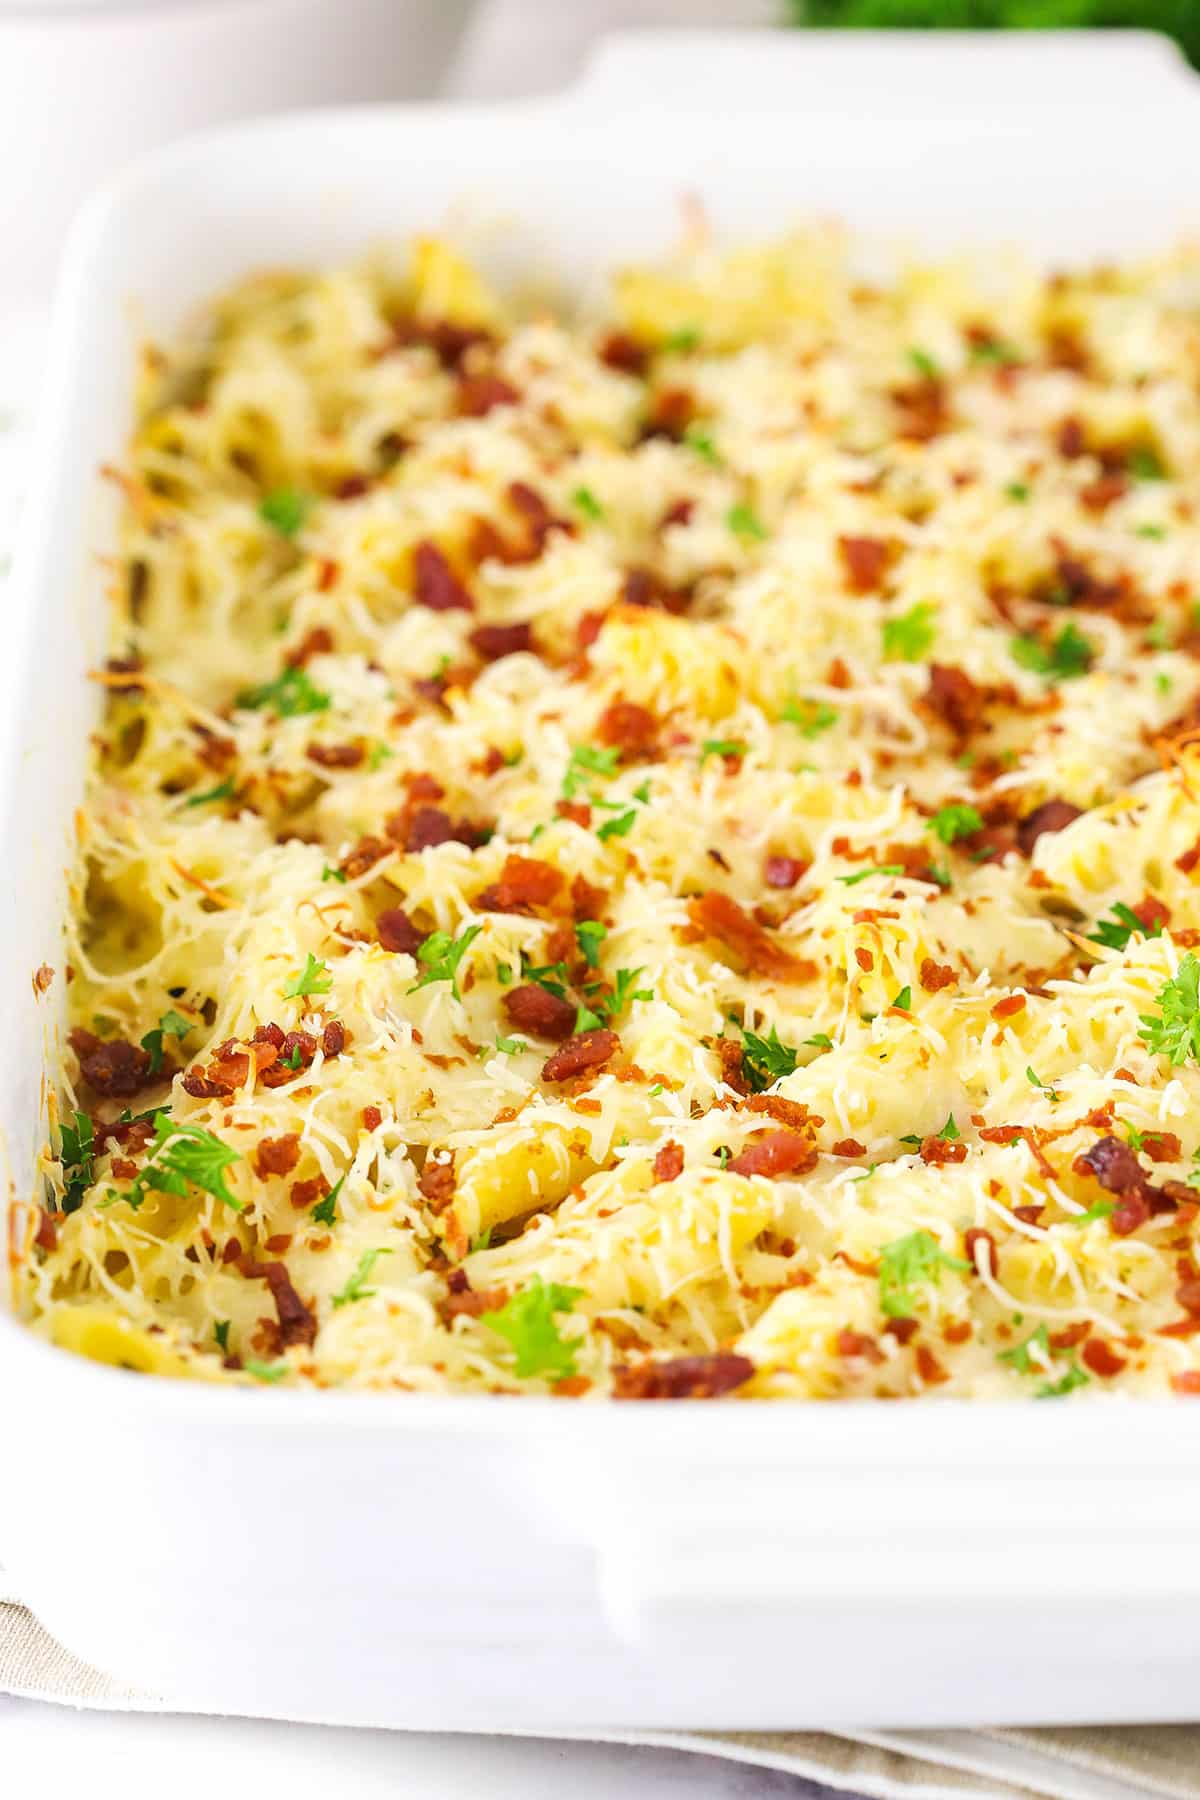 Casserole in the baking dish. Topped with cheese and bacon bits.